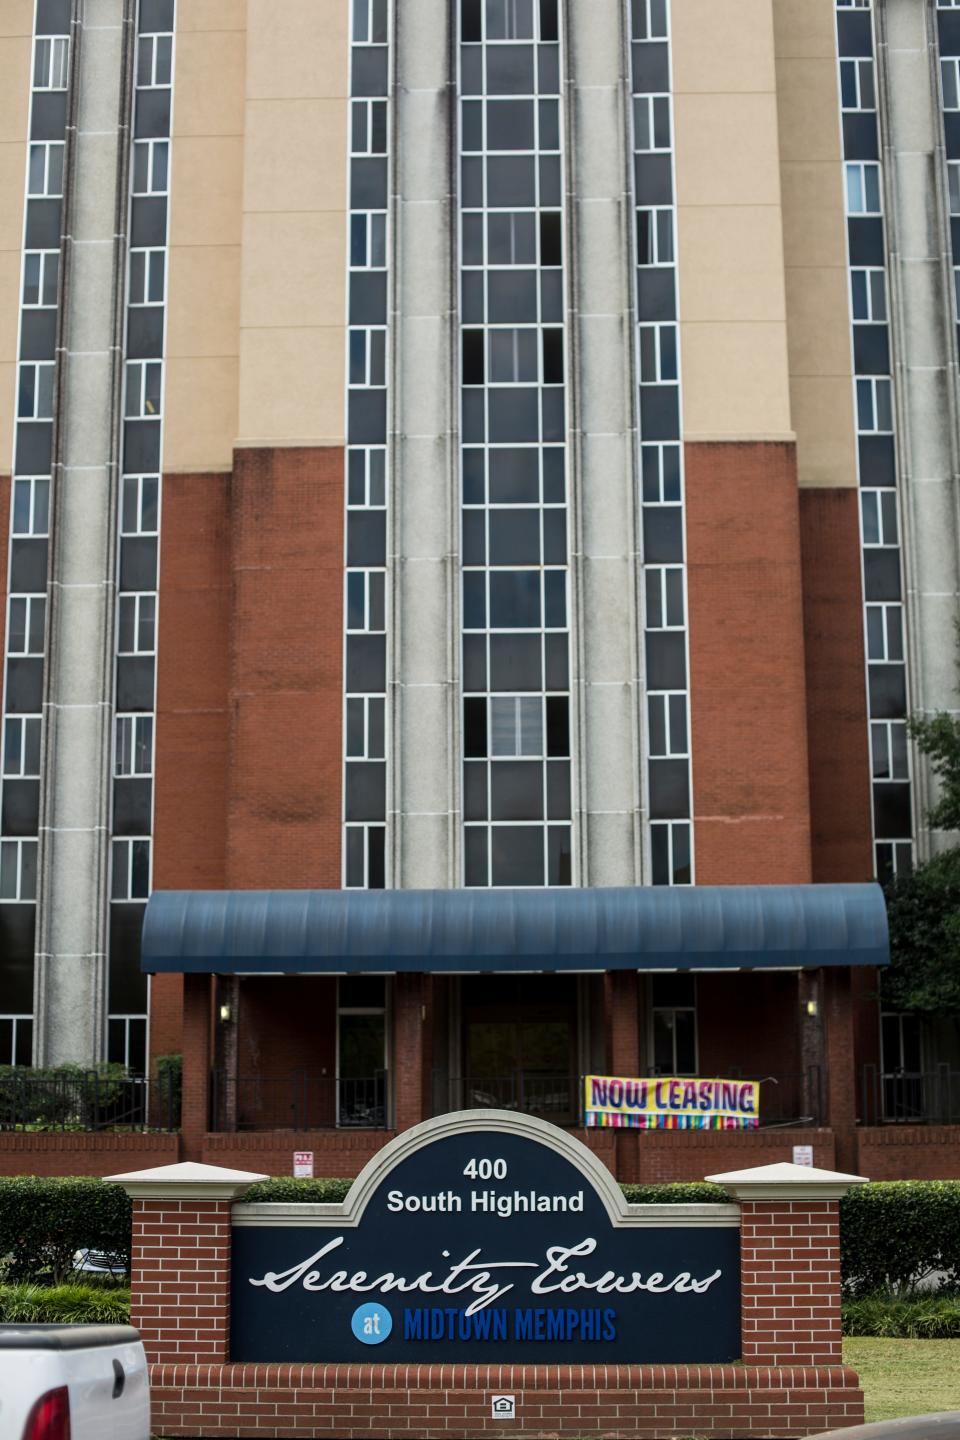 September 17, 2015 - The main entrance to the Serenity Towers on Highland are seen. The Global Ministries Foundation Preservation of Affordability Corp. is asking the county to accept reimbursement funds for its HUD subsidized apartments at the Serenity Towers. The property is now Serenity at Highland and under new management.
(Brad Vest/The Commercial Appeal)